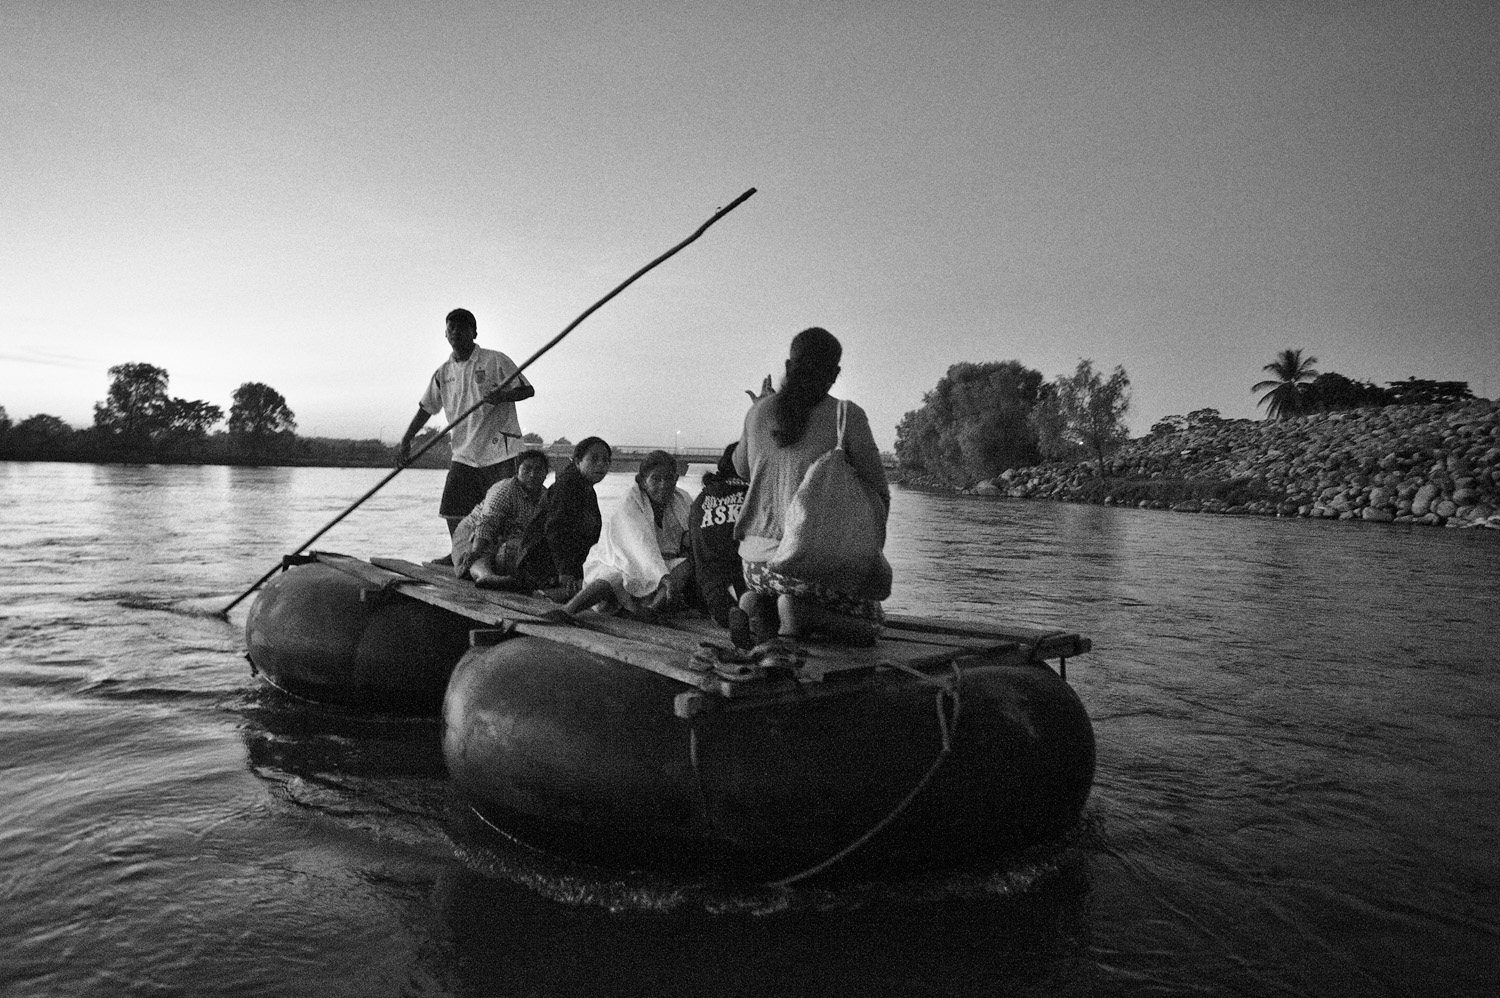 Rafts are used to transport local people, migrants and goods across the Suchiate river between Guatemala and Mexico.